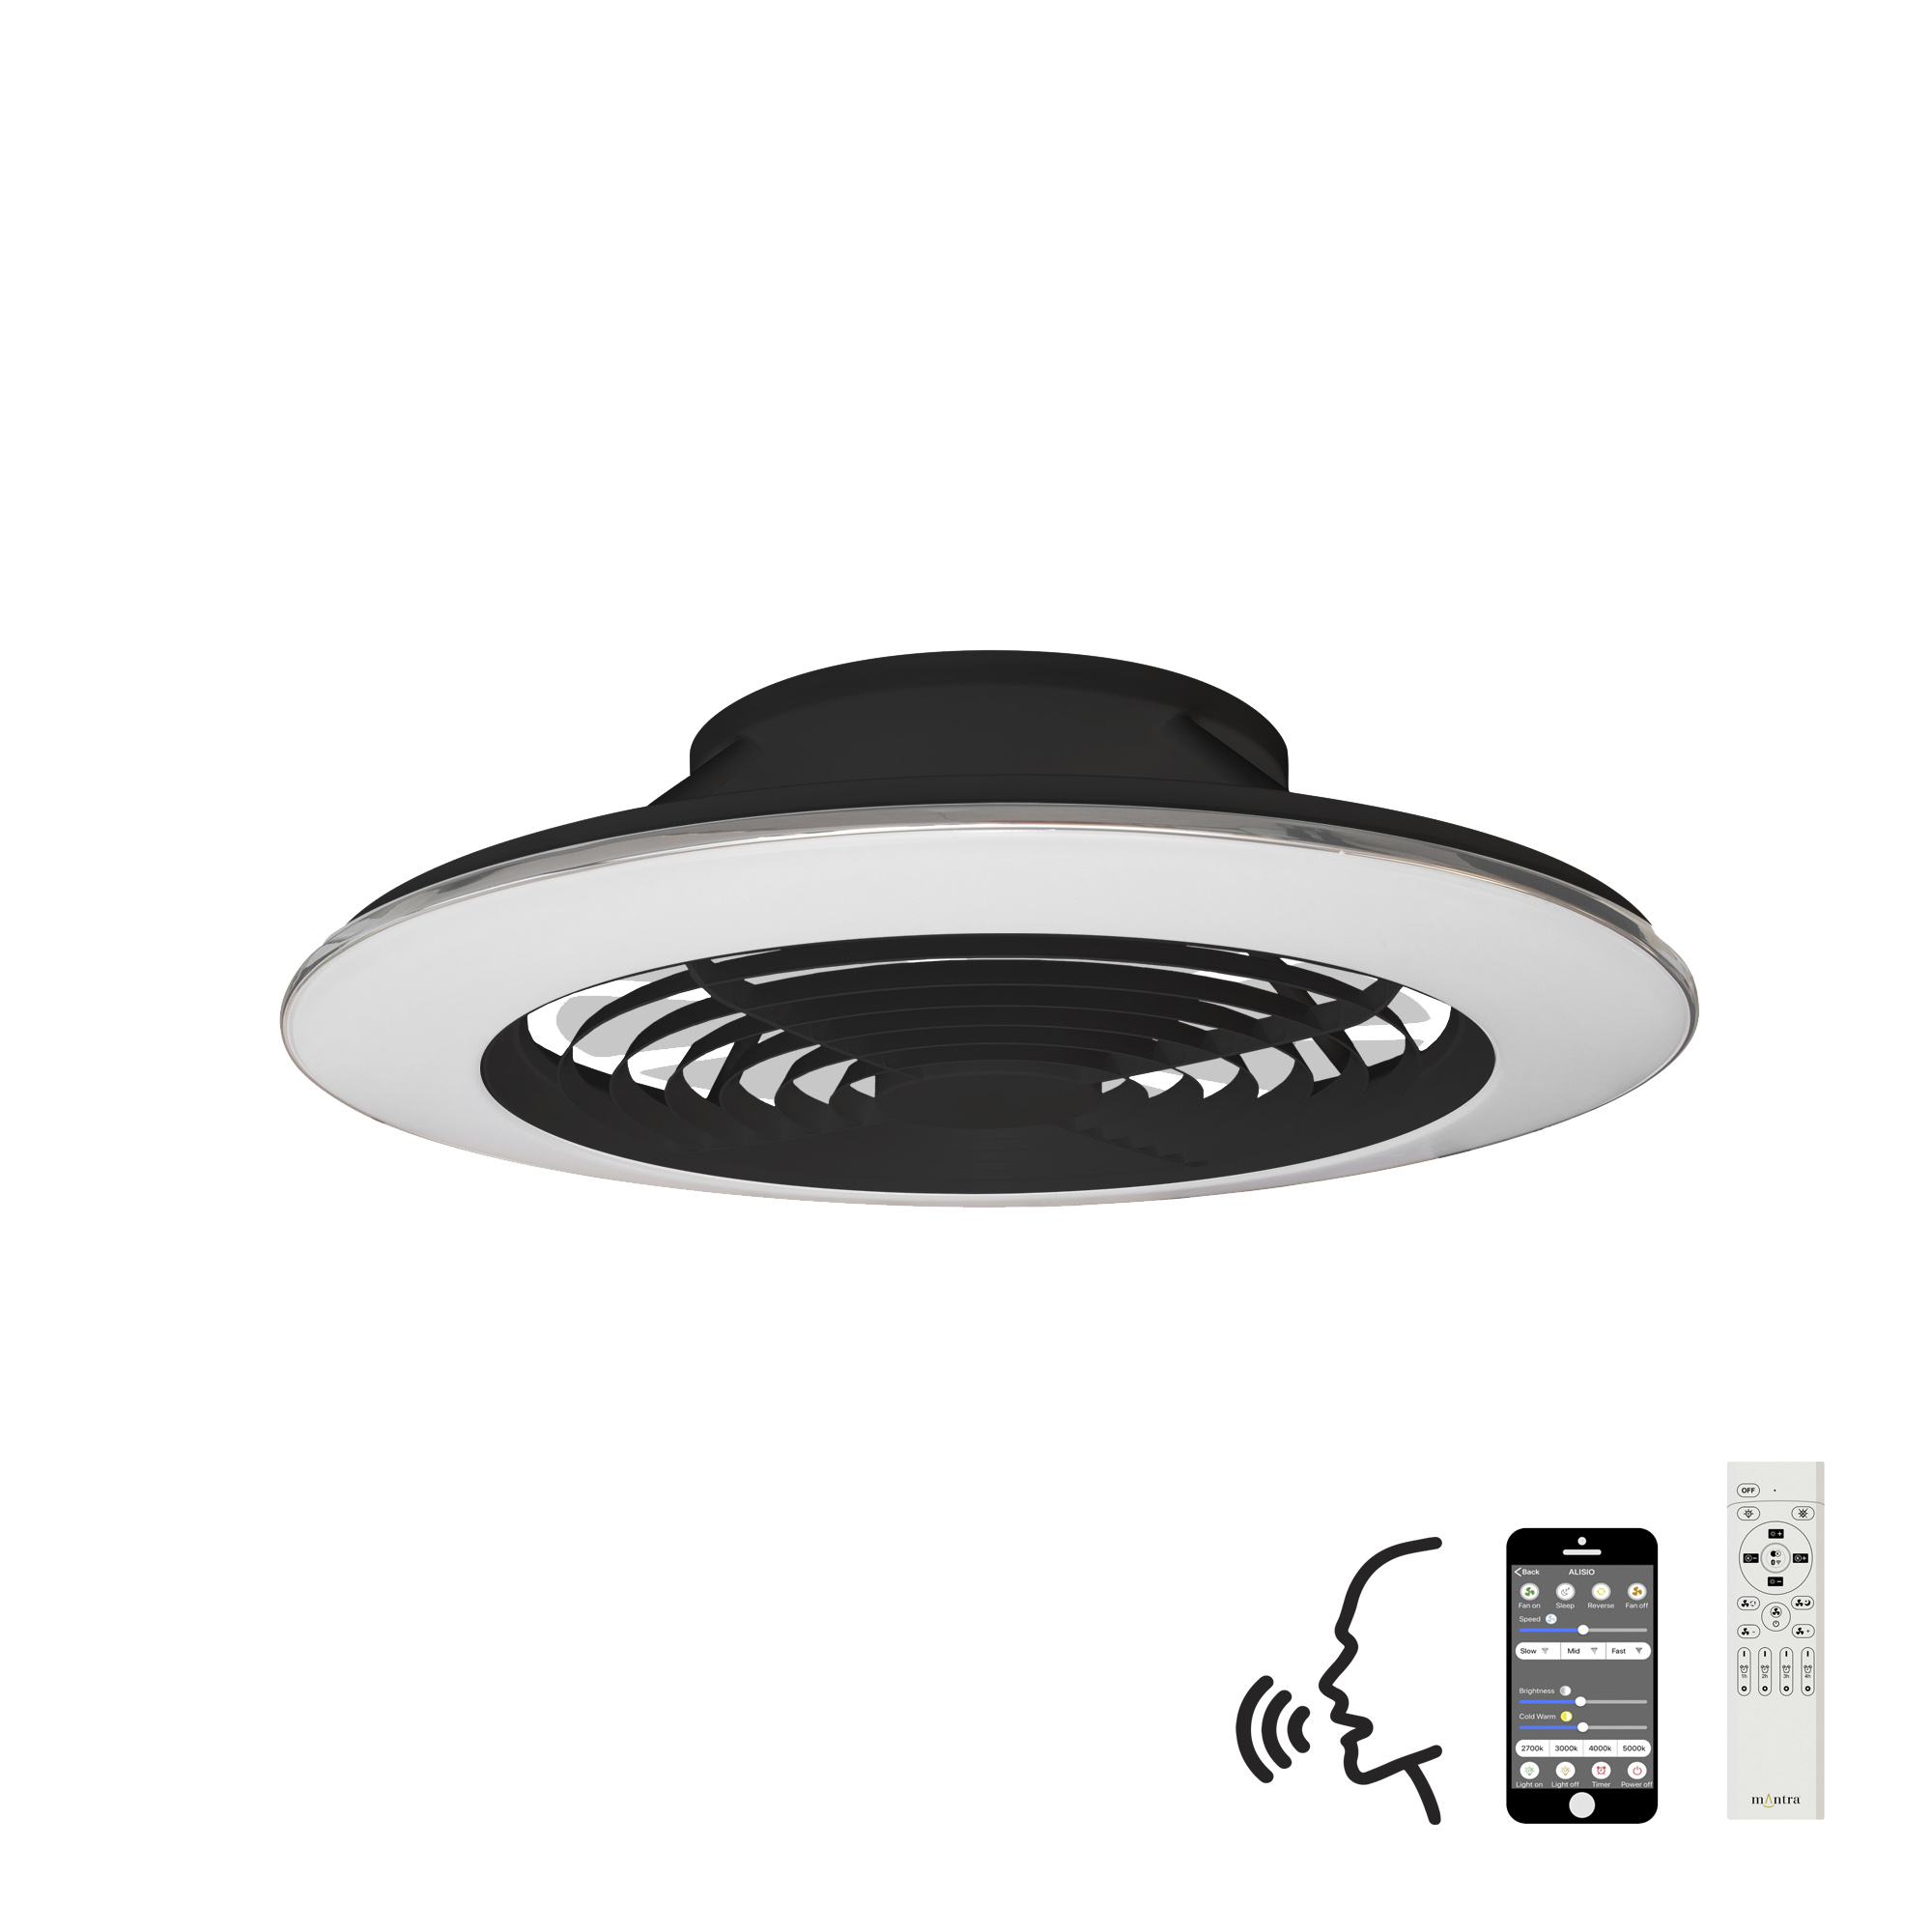 M7492  Alisio XL 95W LED Dimmable Ceiling Light & Fan; Remote / APP / Voice Controlled Black